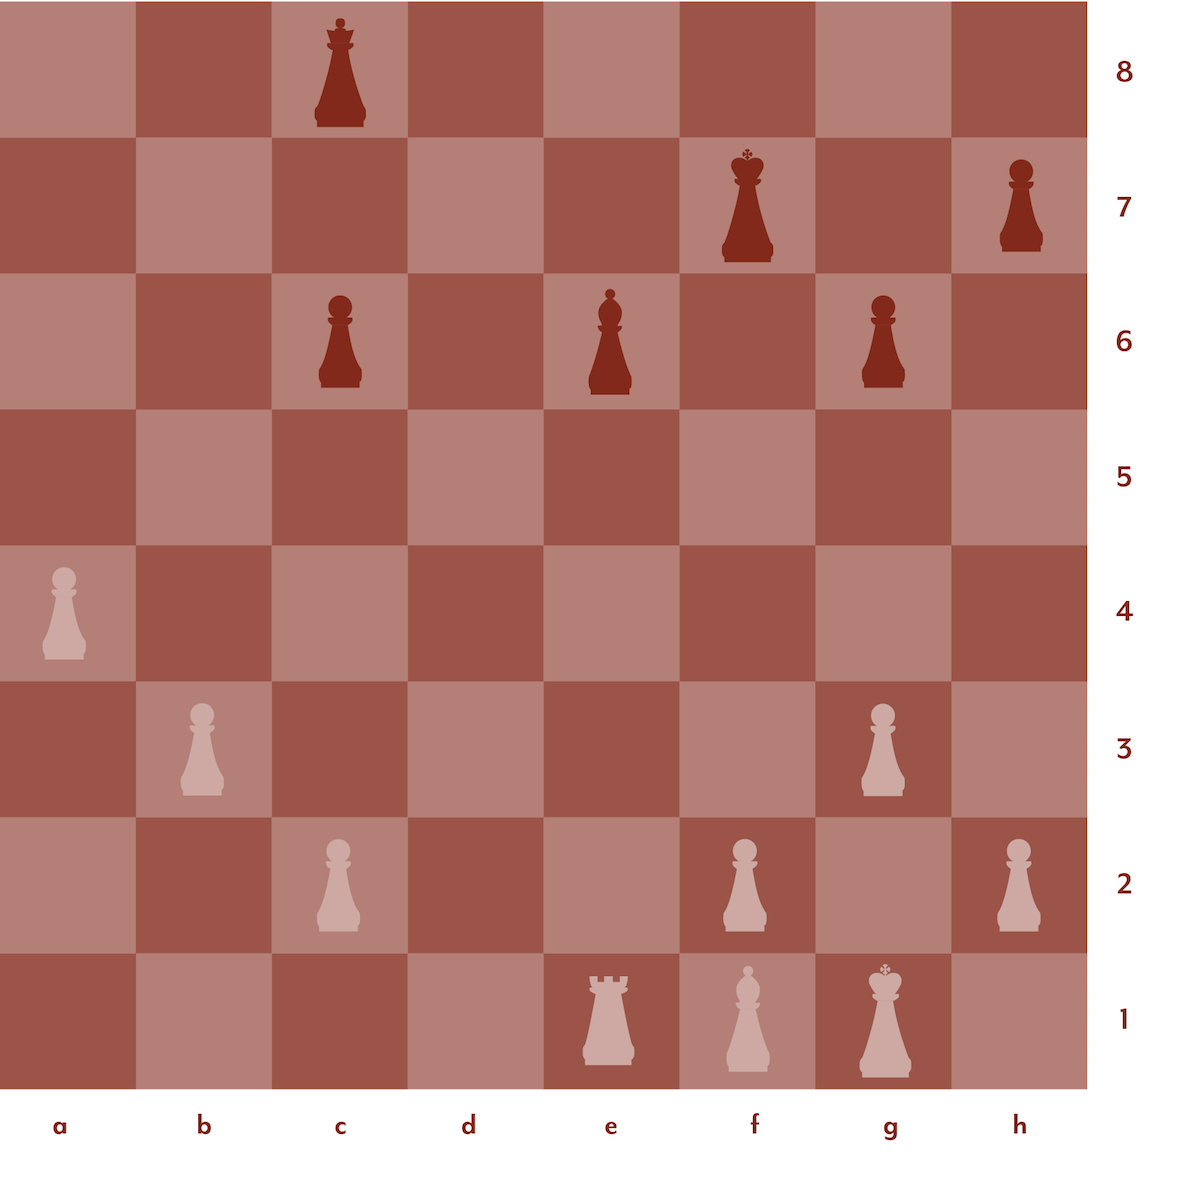 File:Chess-tactics-image skewer-attack absolute.gif - Wikipedia